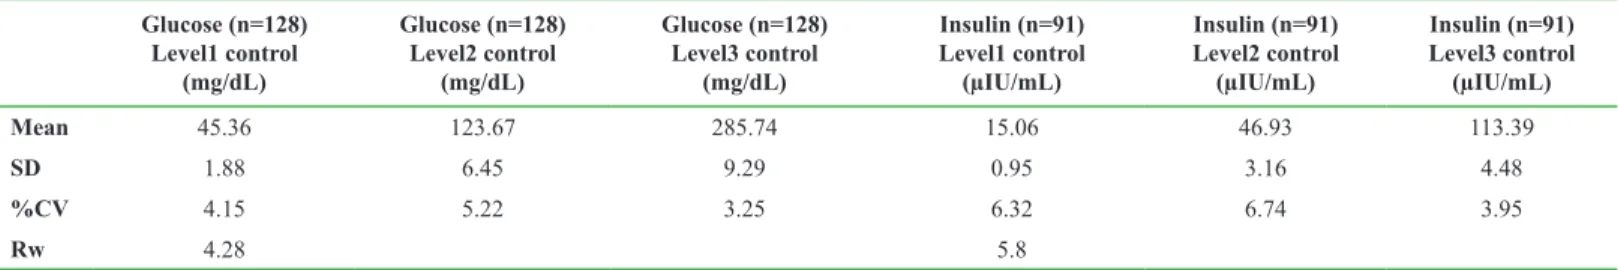 Table 1. %CV values of internal quality control  Glucose (n=128) Level1 control (mg/dL) Glucose (n=128)Level2 control(mg/dL) Glucose (n=128)Level3 control(mg/dL) Insulin (n=91)Level1 control(µIU/mL) Insulin (n=91)Level2 control(µIU/mL) Insulin (n=91)Level3